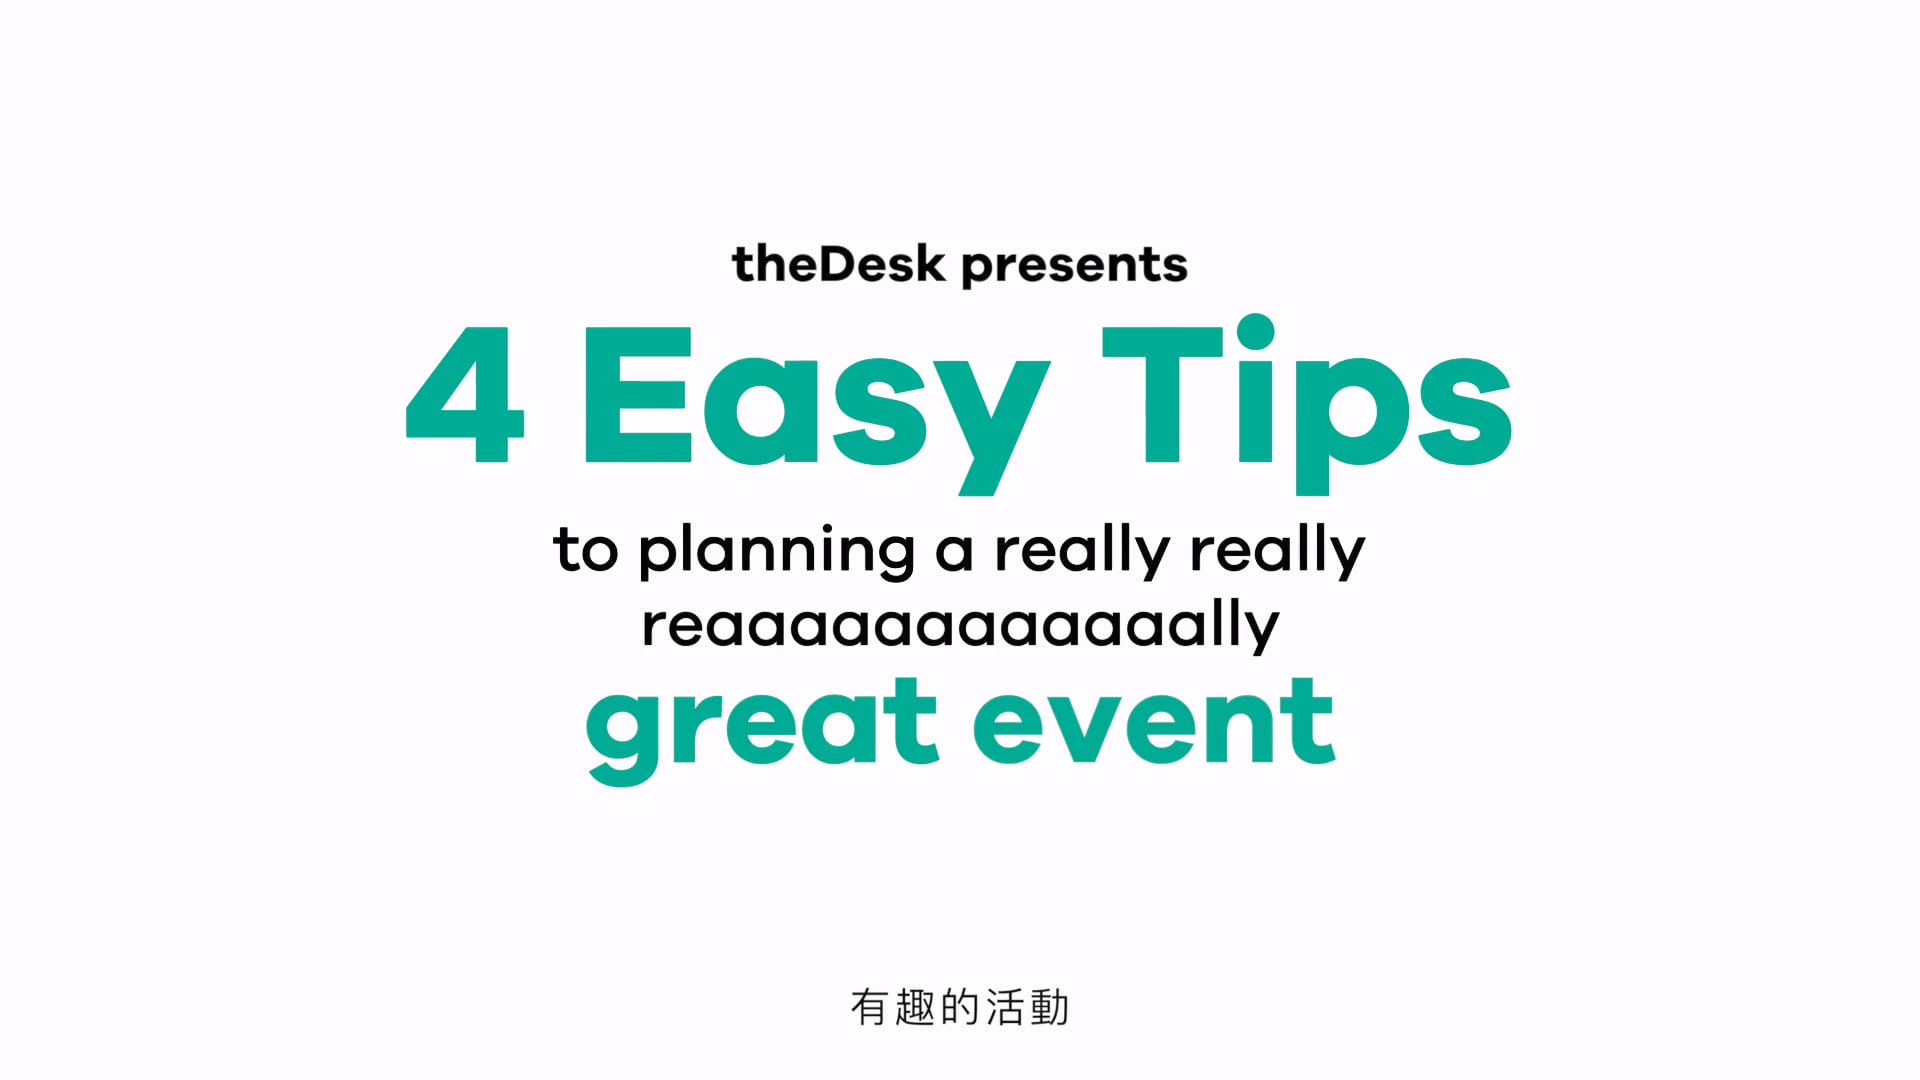 theDesk presents: 4 Easy Steps to planning a really really reaaaaally great event